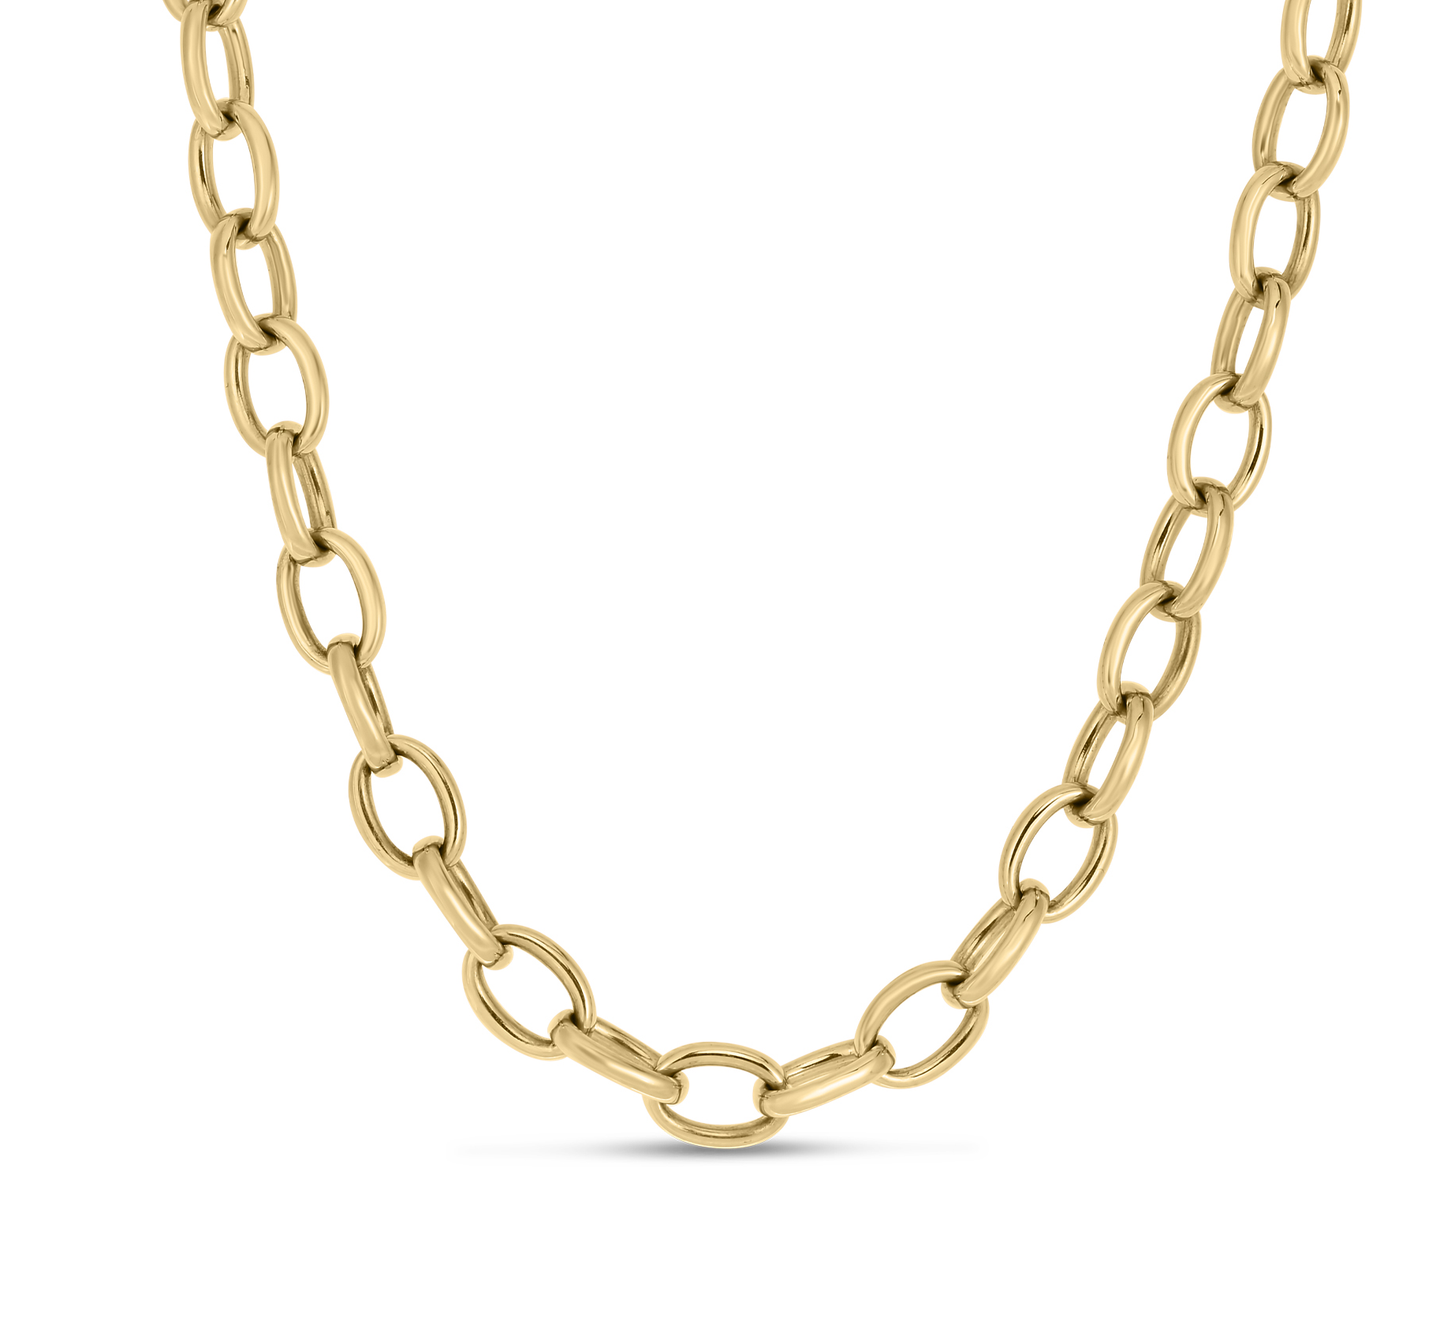 Roberto Coin Designer Gold Oval Link Chain Necklace